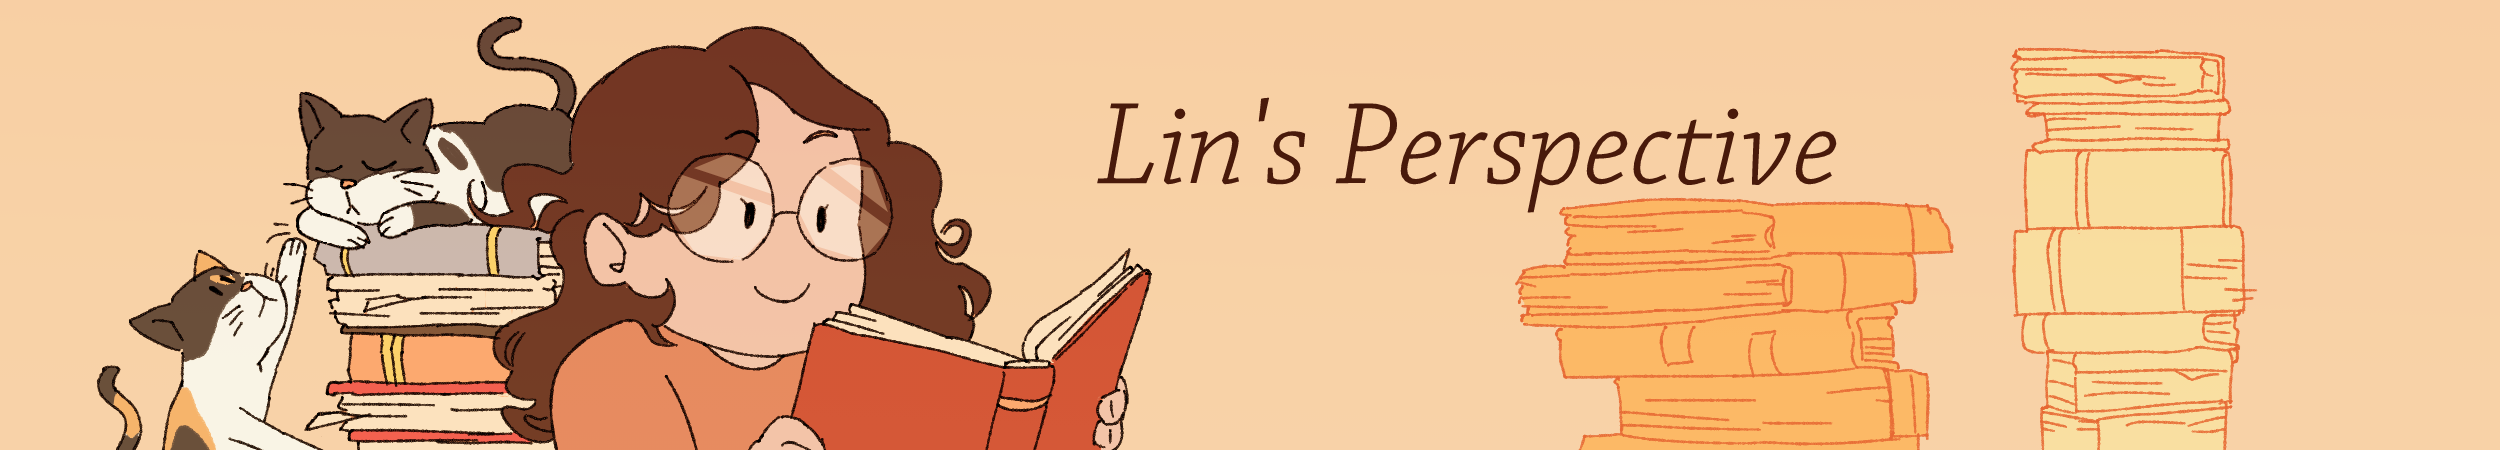 Lin's Perspective